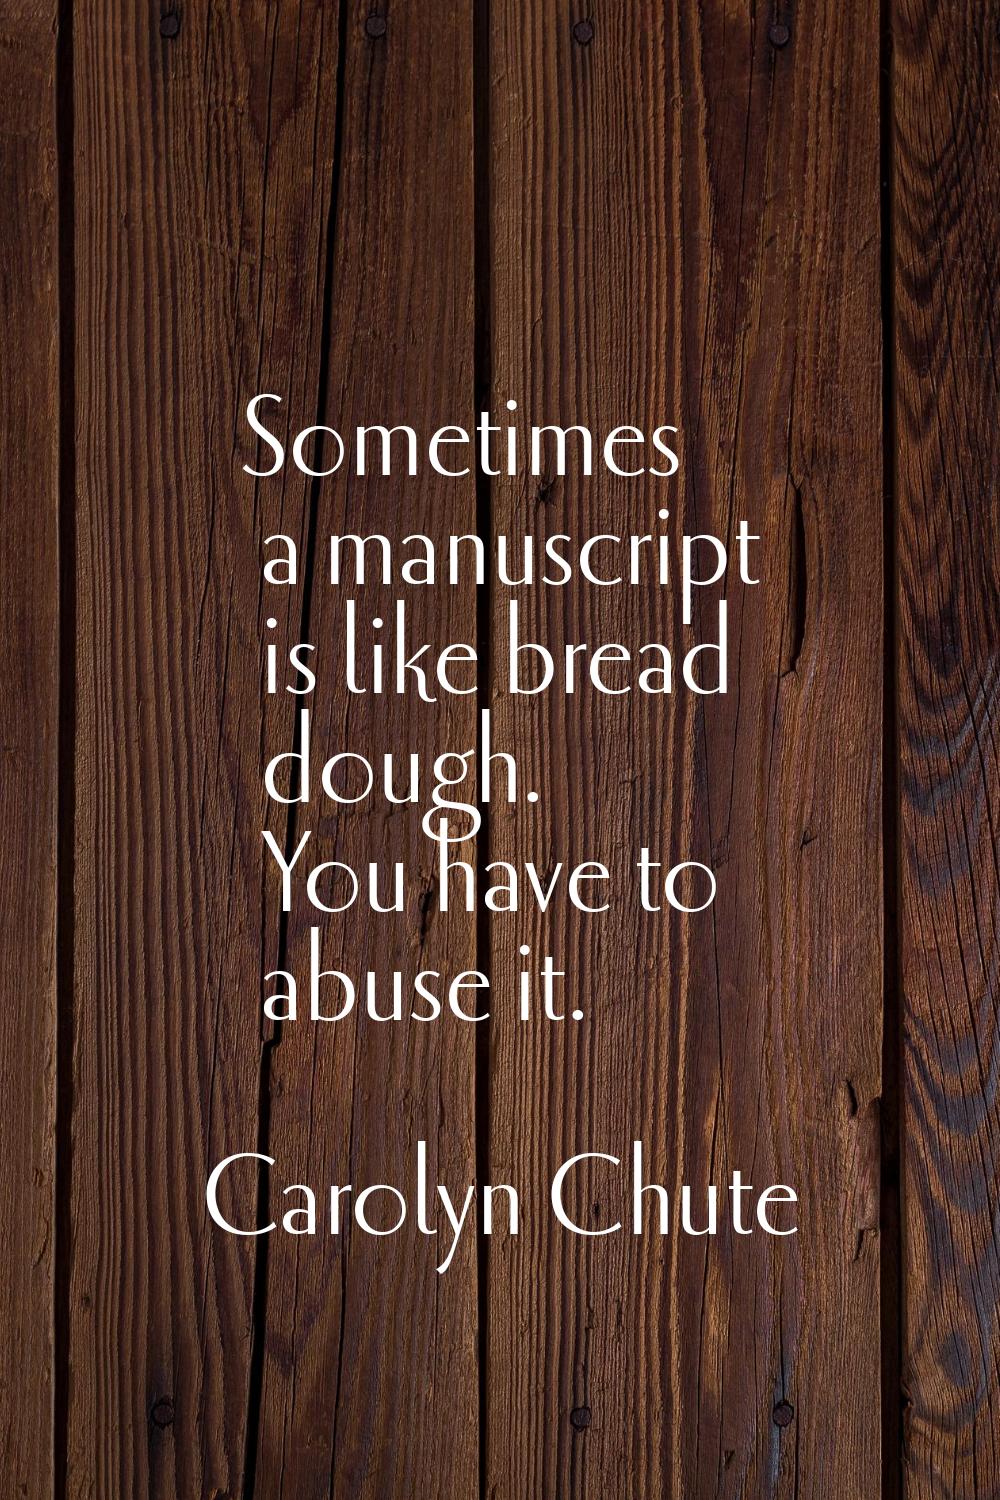 Sometimes a manuscript is like bread dough. You have to abuse it.